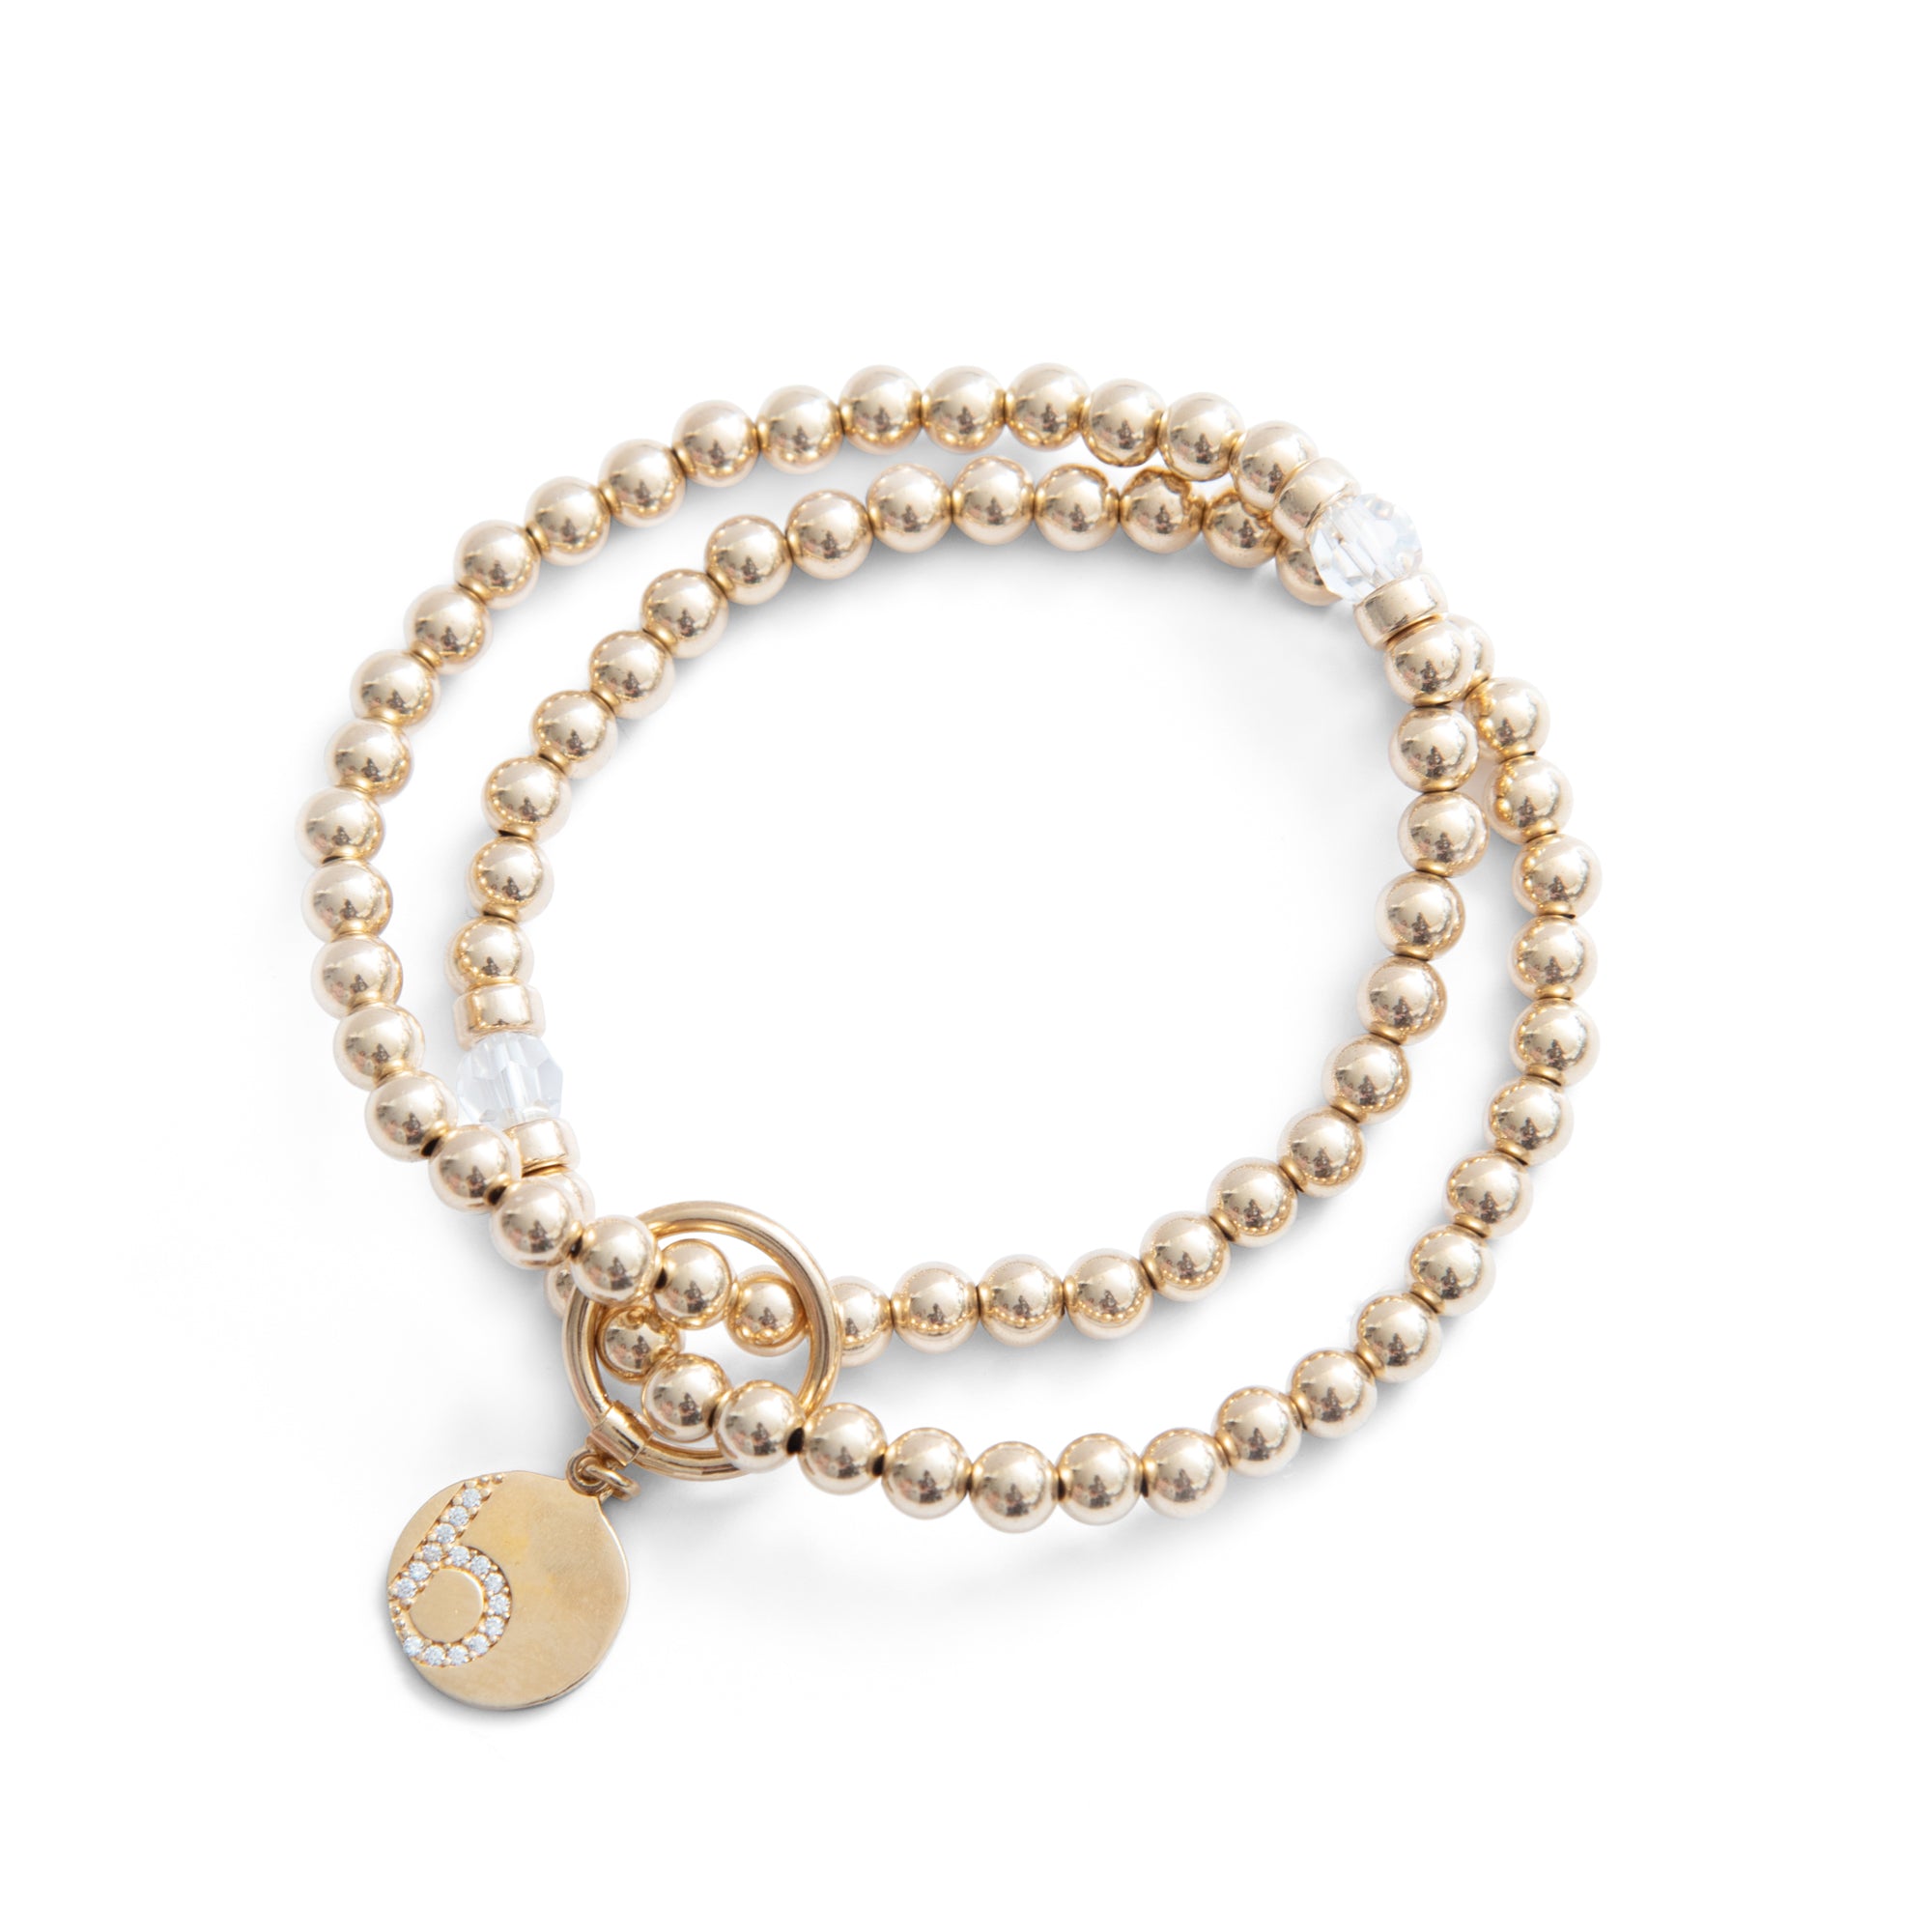 be razzled-dazzled women&#39;s bracelet sterling silver 14kt gold vermeil handcrafted in canada  